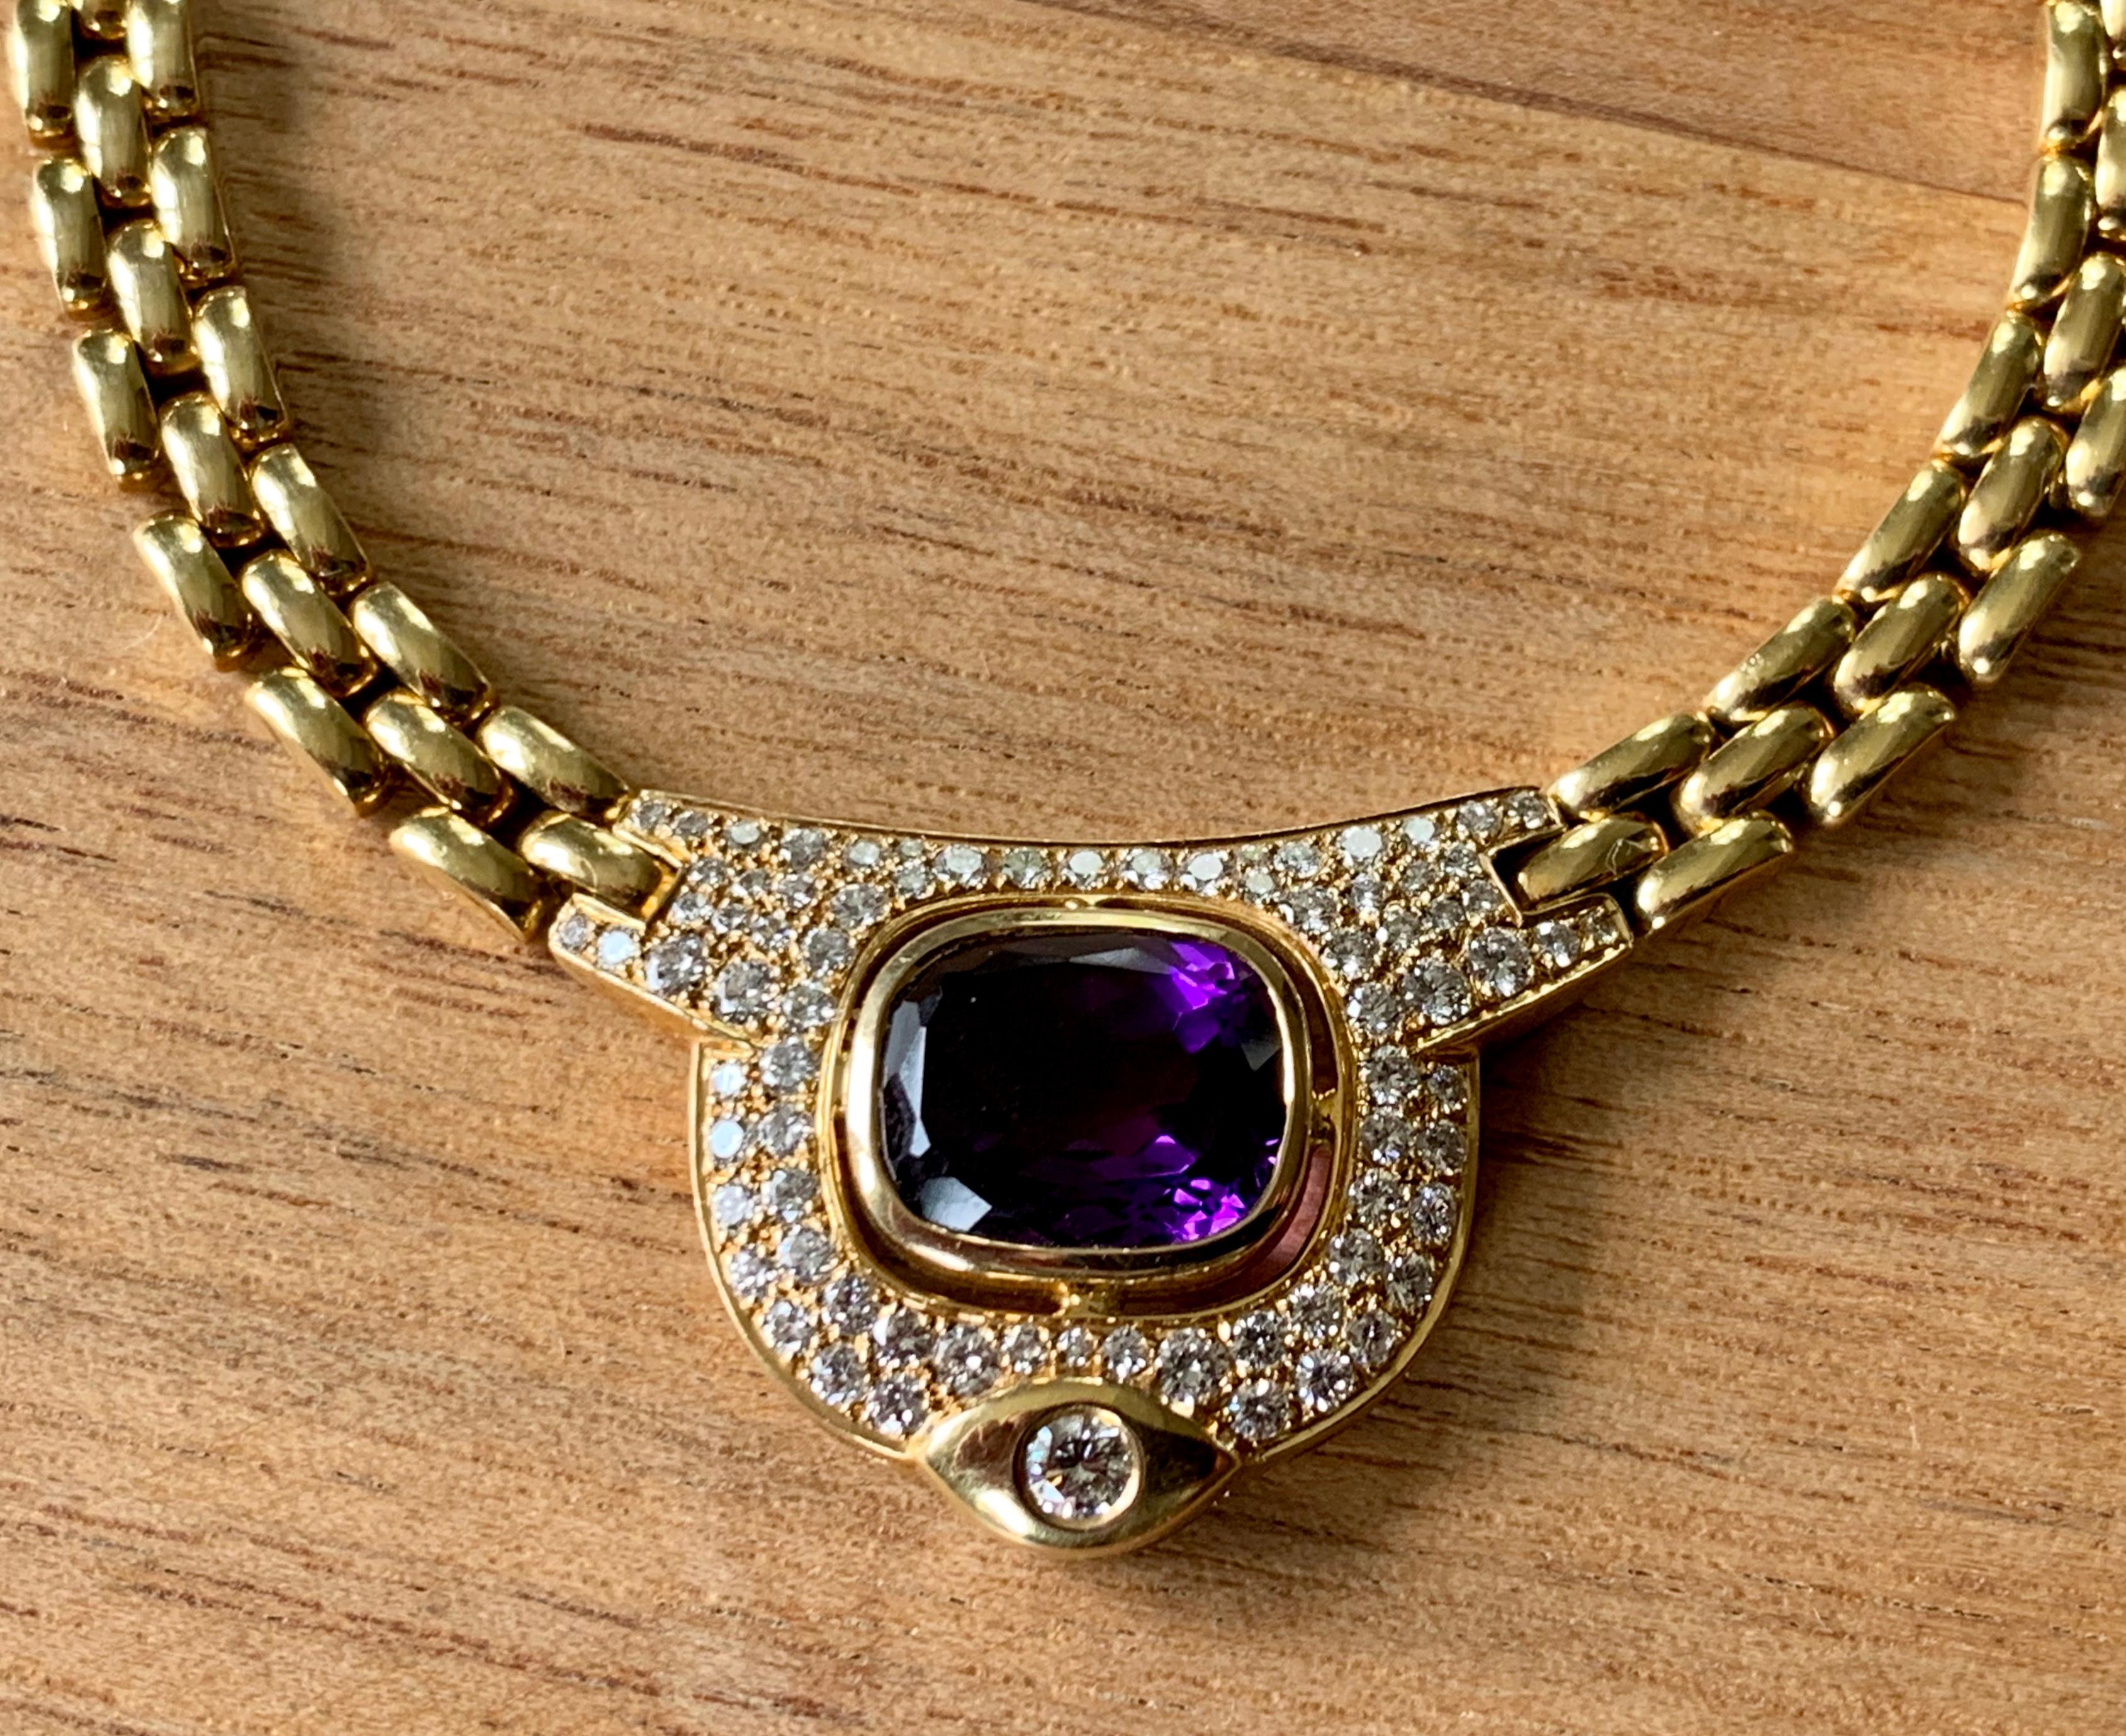 Women's or Men's Vintage 18 K Gold Link Chain Necklace with Amethyst and Diamonds by Kurz Zurich